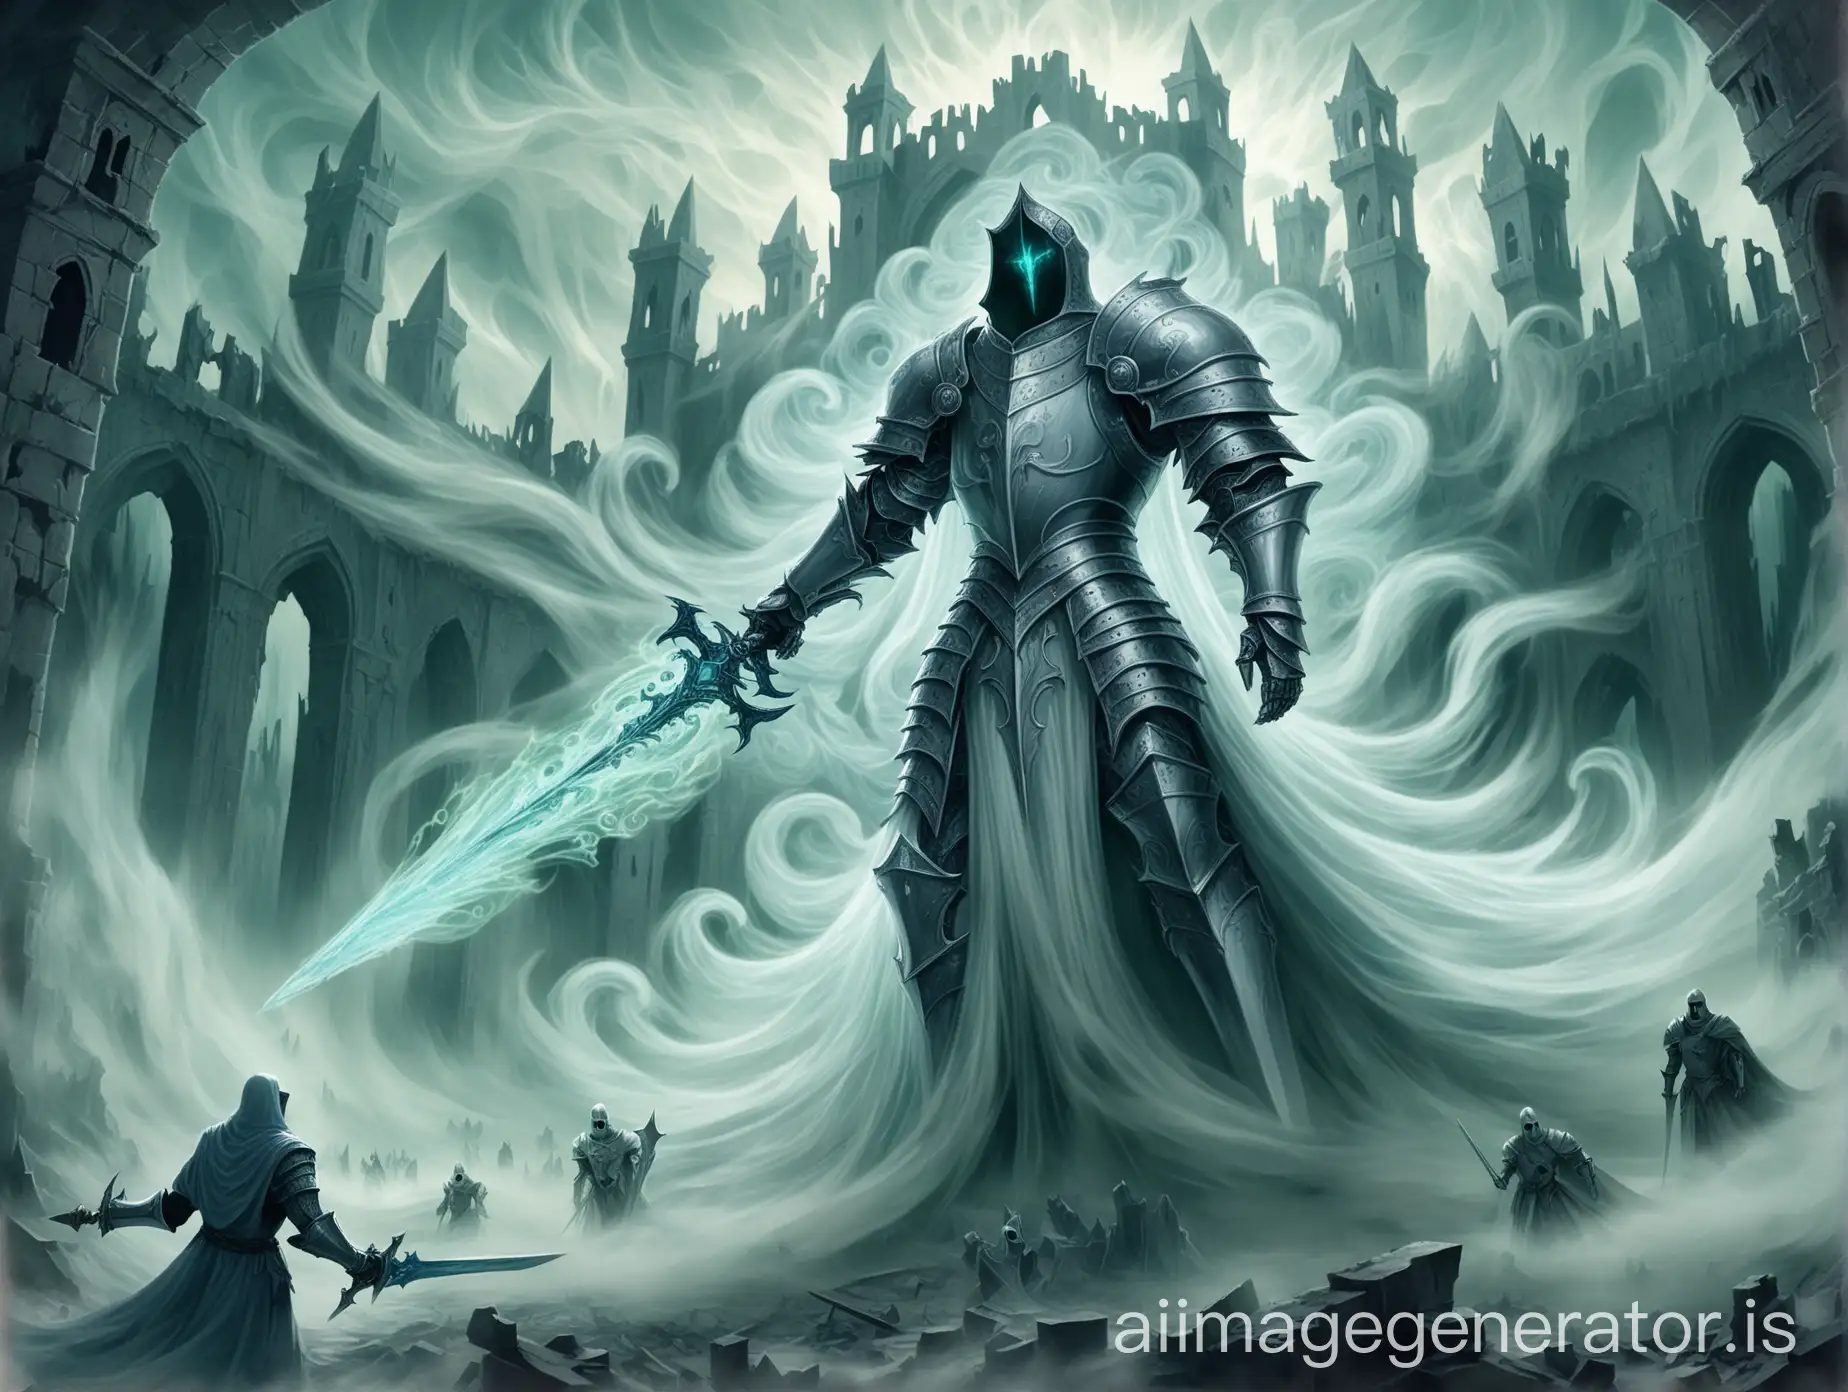 Craft a digital artwork of a determined knight, surrounded by swirling mist, battling a gargantuan, spectral specter amidst the ruins of a forgotten citadel. The specter's ethereal form billows and shifts with unearthly grace as it assails the knight, who stands undaunted against the ghostly onslaught."